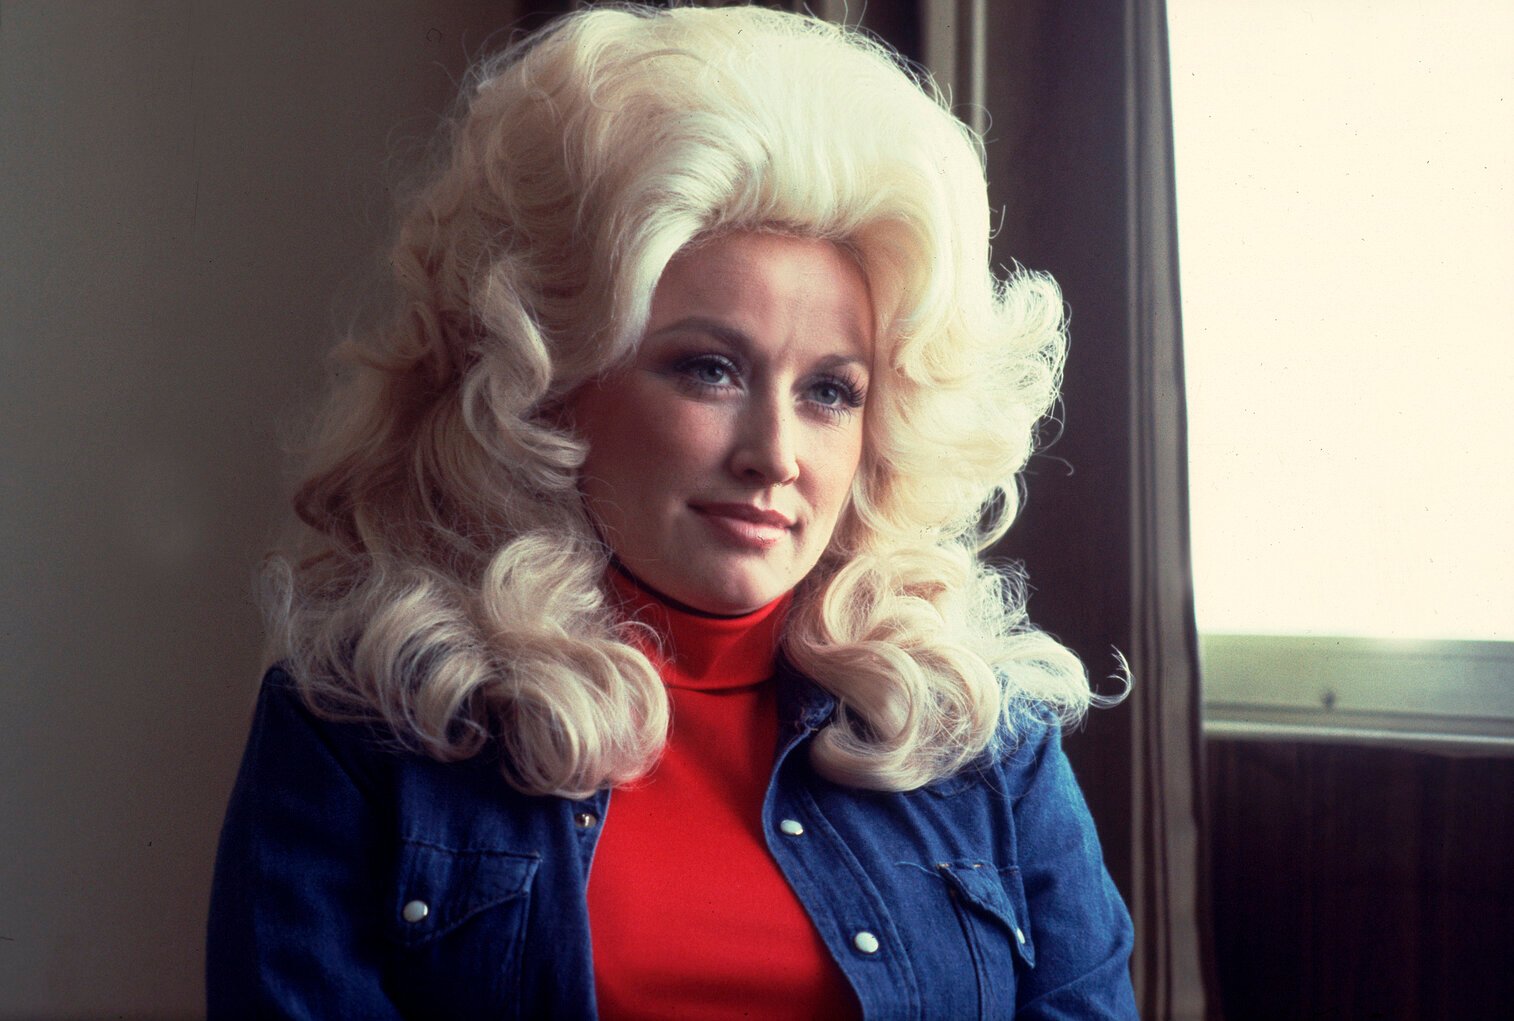 Dolly Parton, 1 of 12 Kids, Used Songwriting as a Way to Get Attention From  Her Mother as a Child